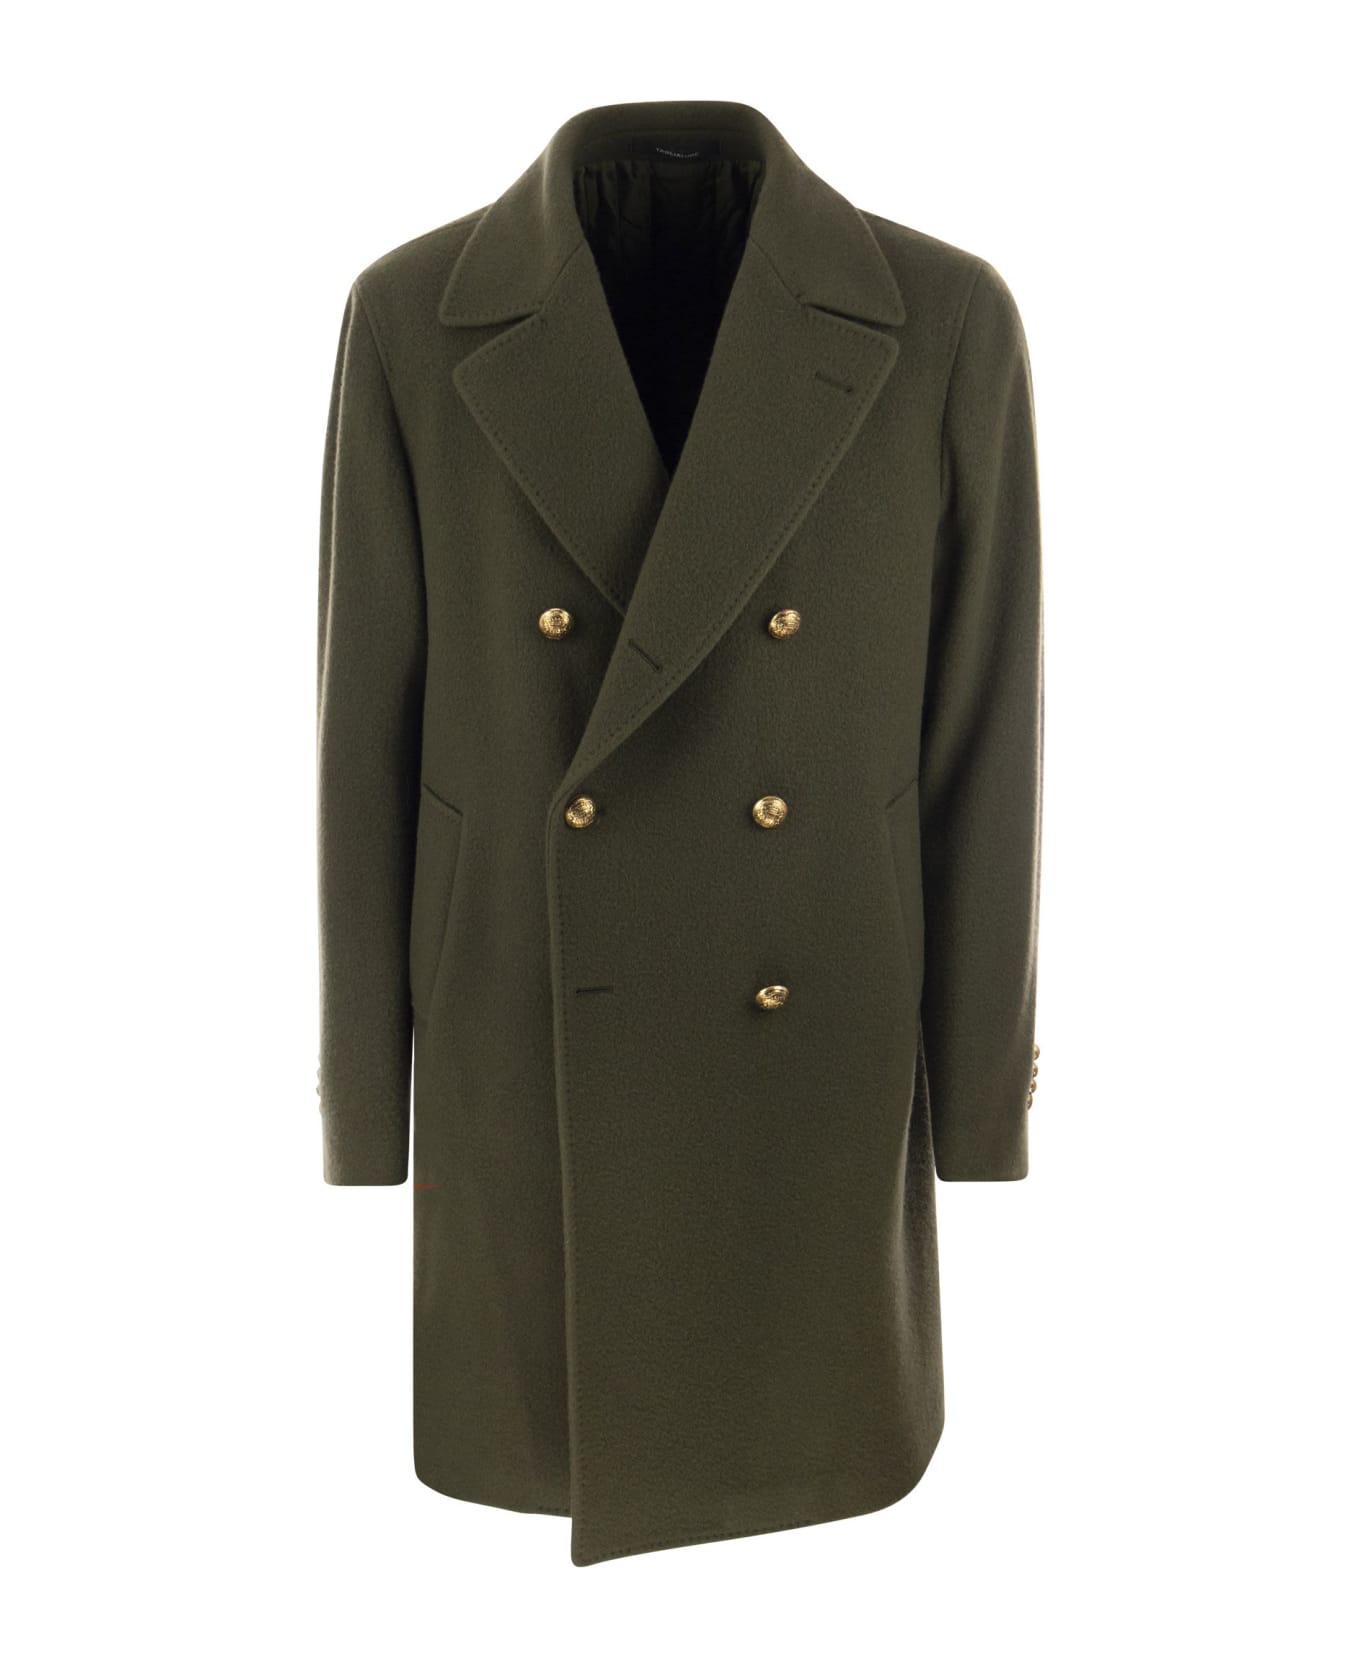 Tagliatore Arden - Double-breasted Wool Coat - Military Green